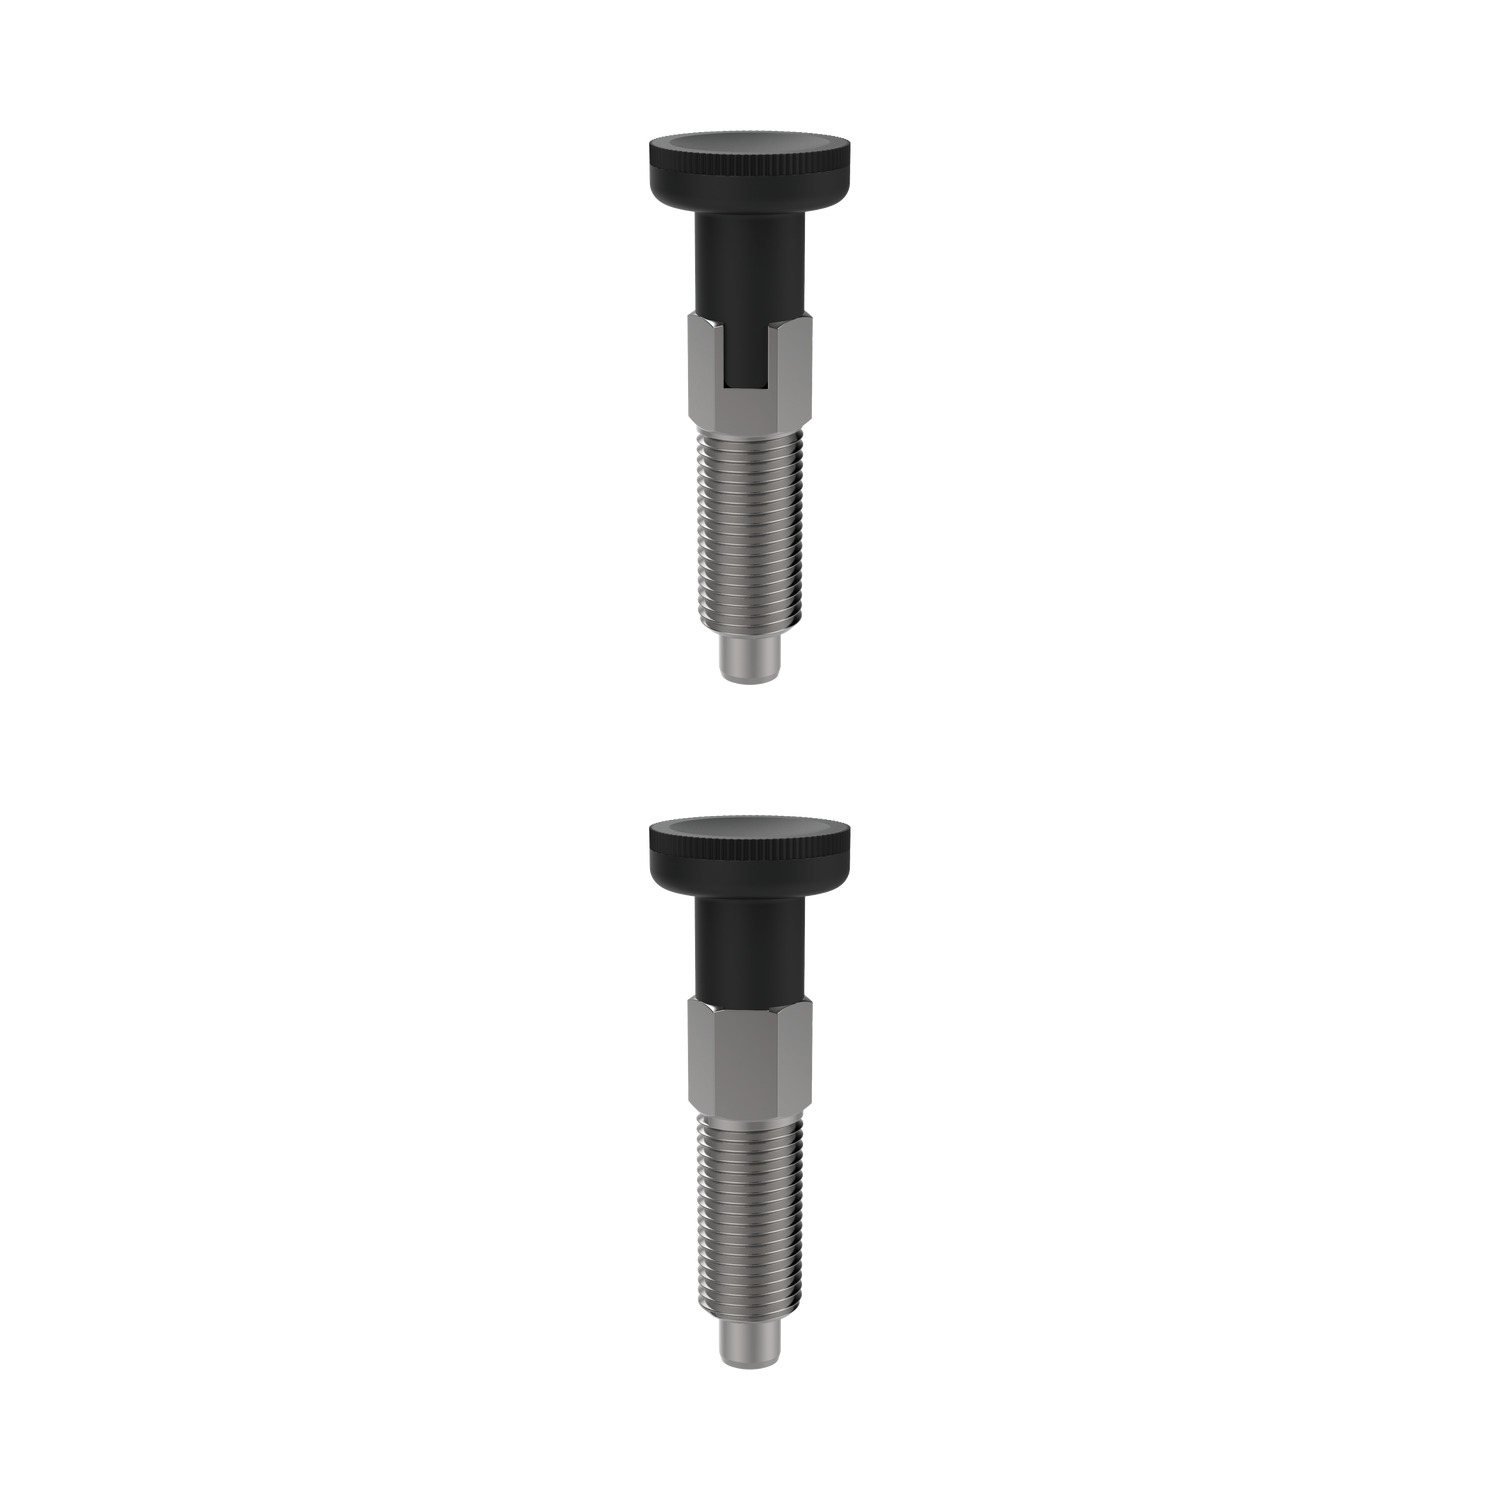 Index Plungers - Pull Grip A pull grip index plunger available in steel or stainless steel with a plastic grip.